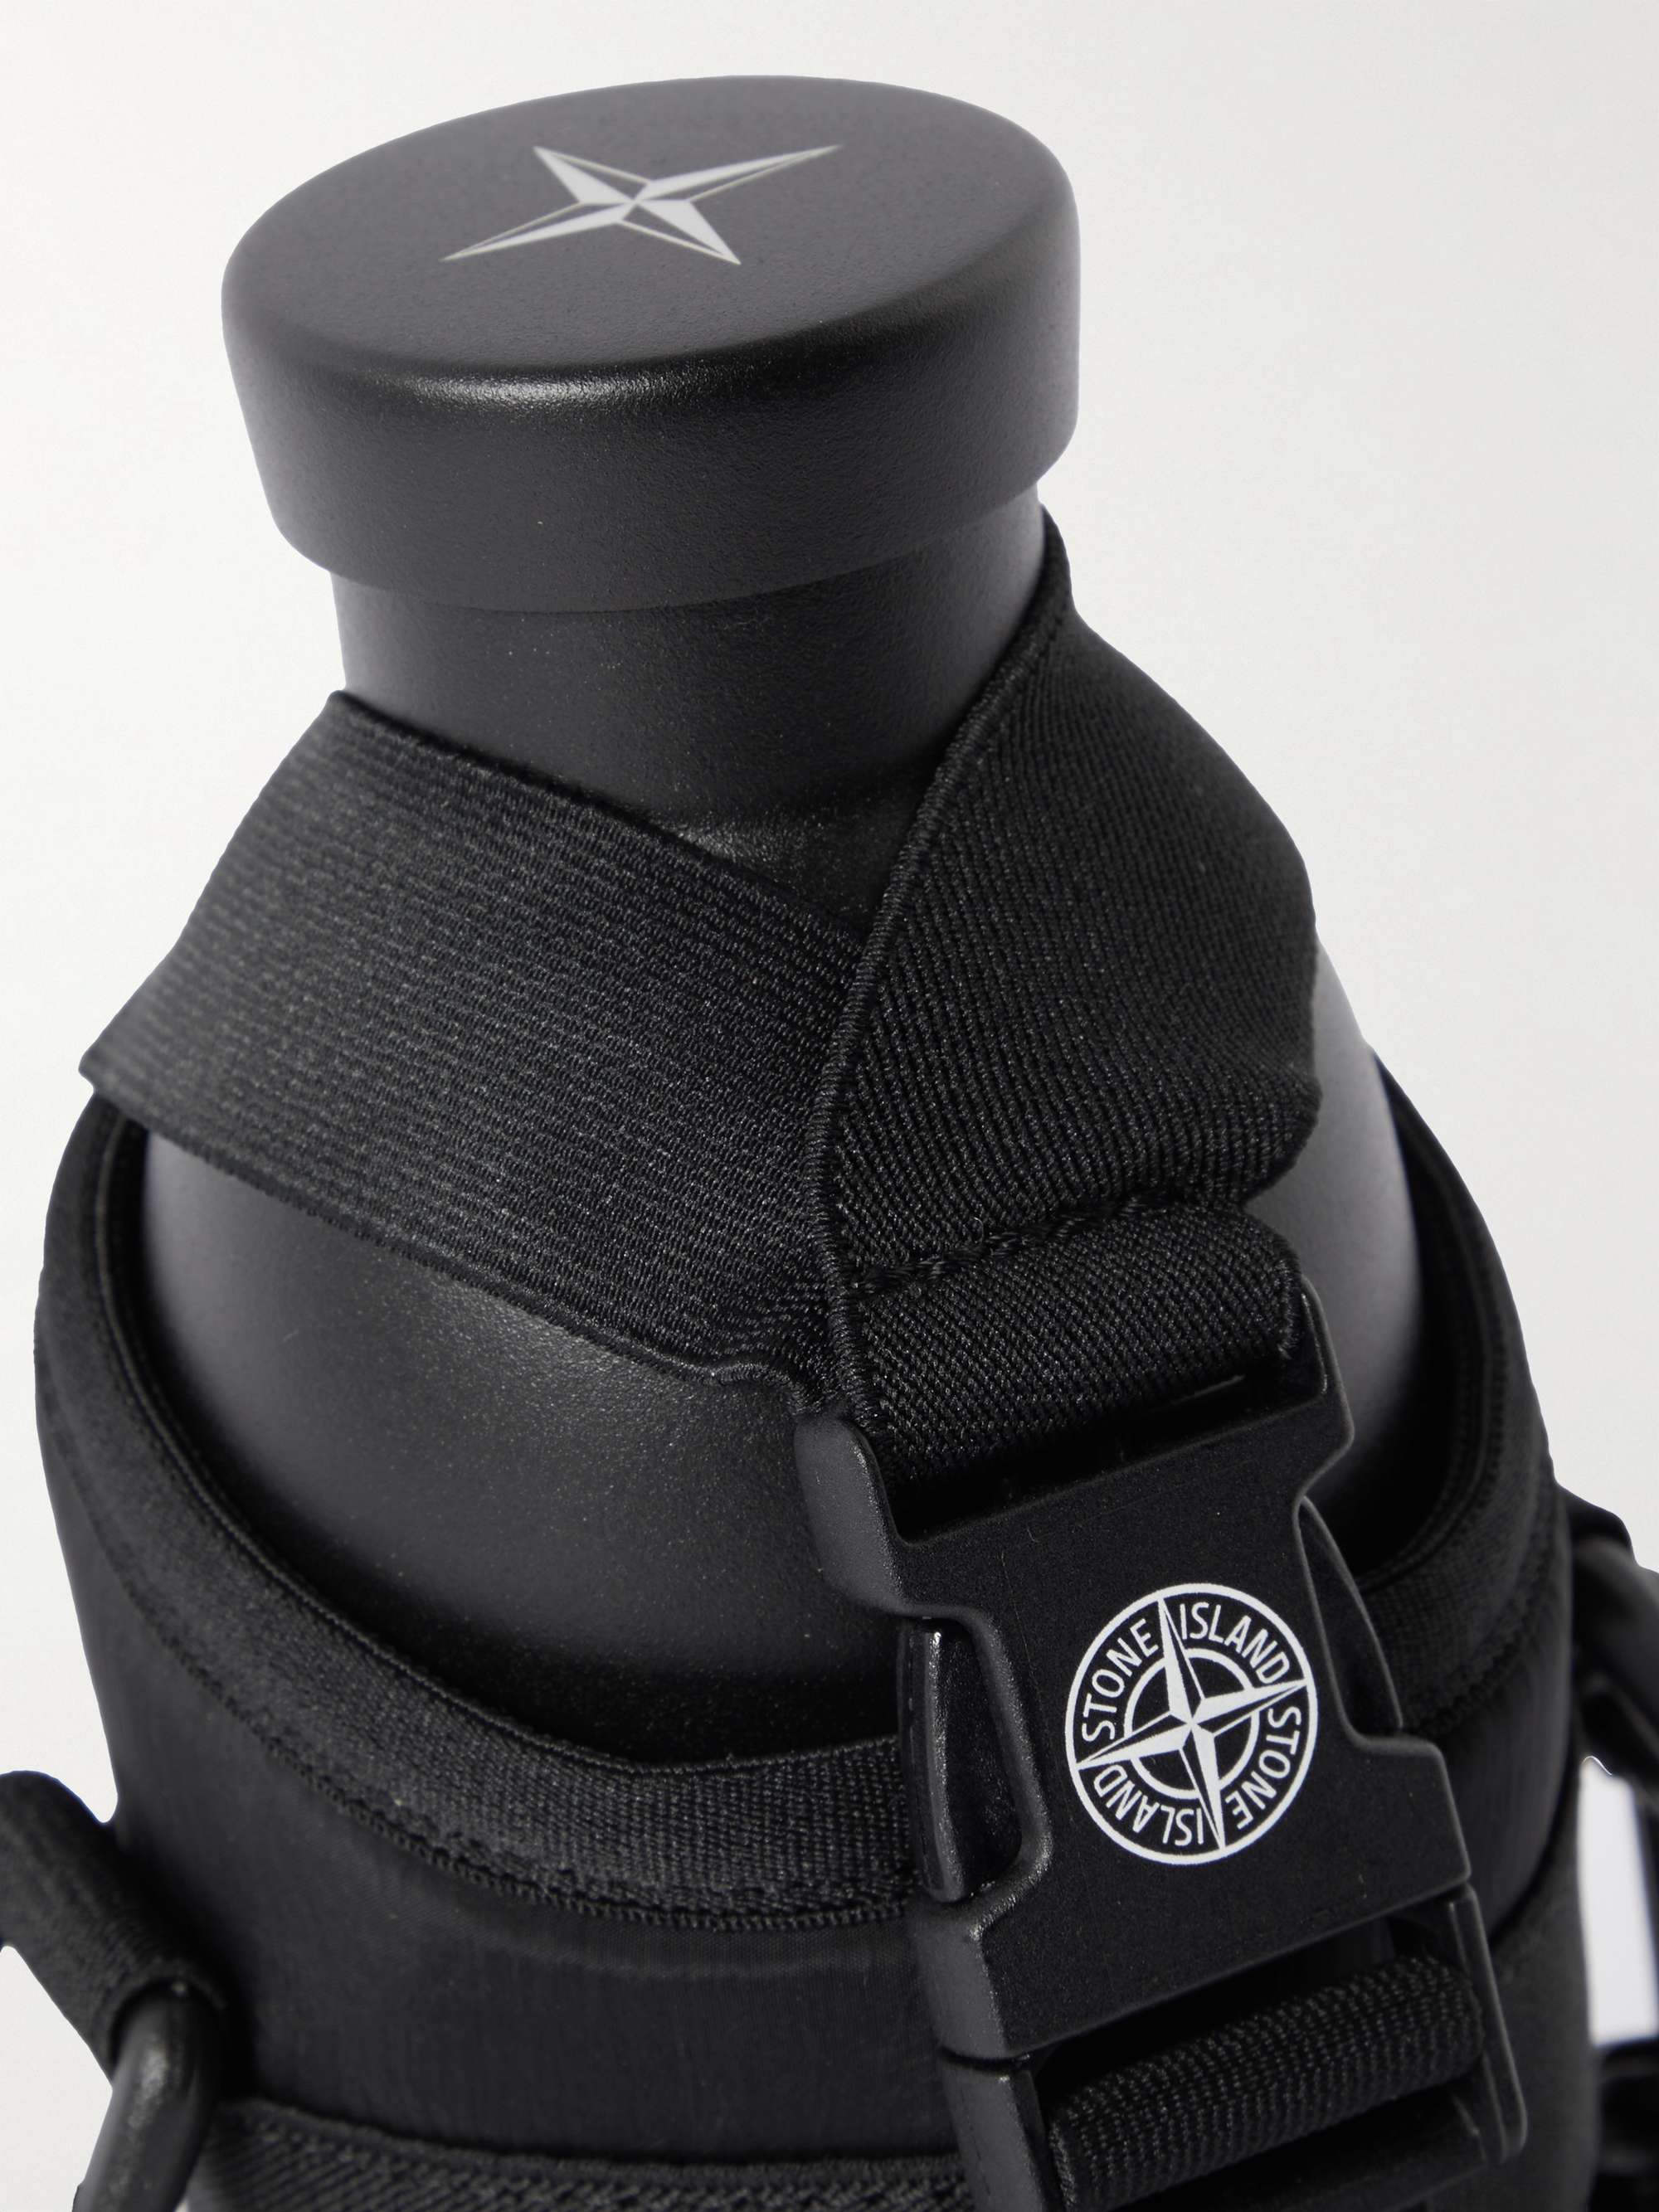 STONE ISLAND Stainless Steel Water Bottle and Nylon Holder